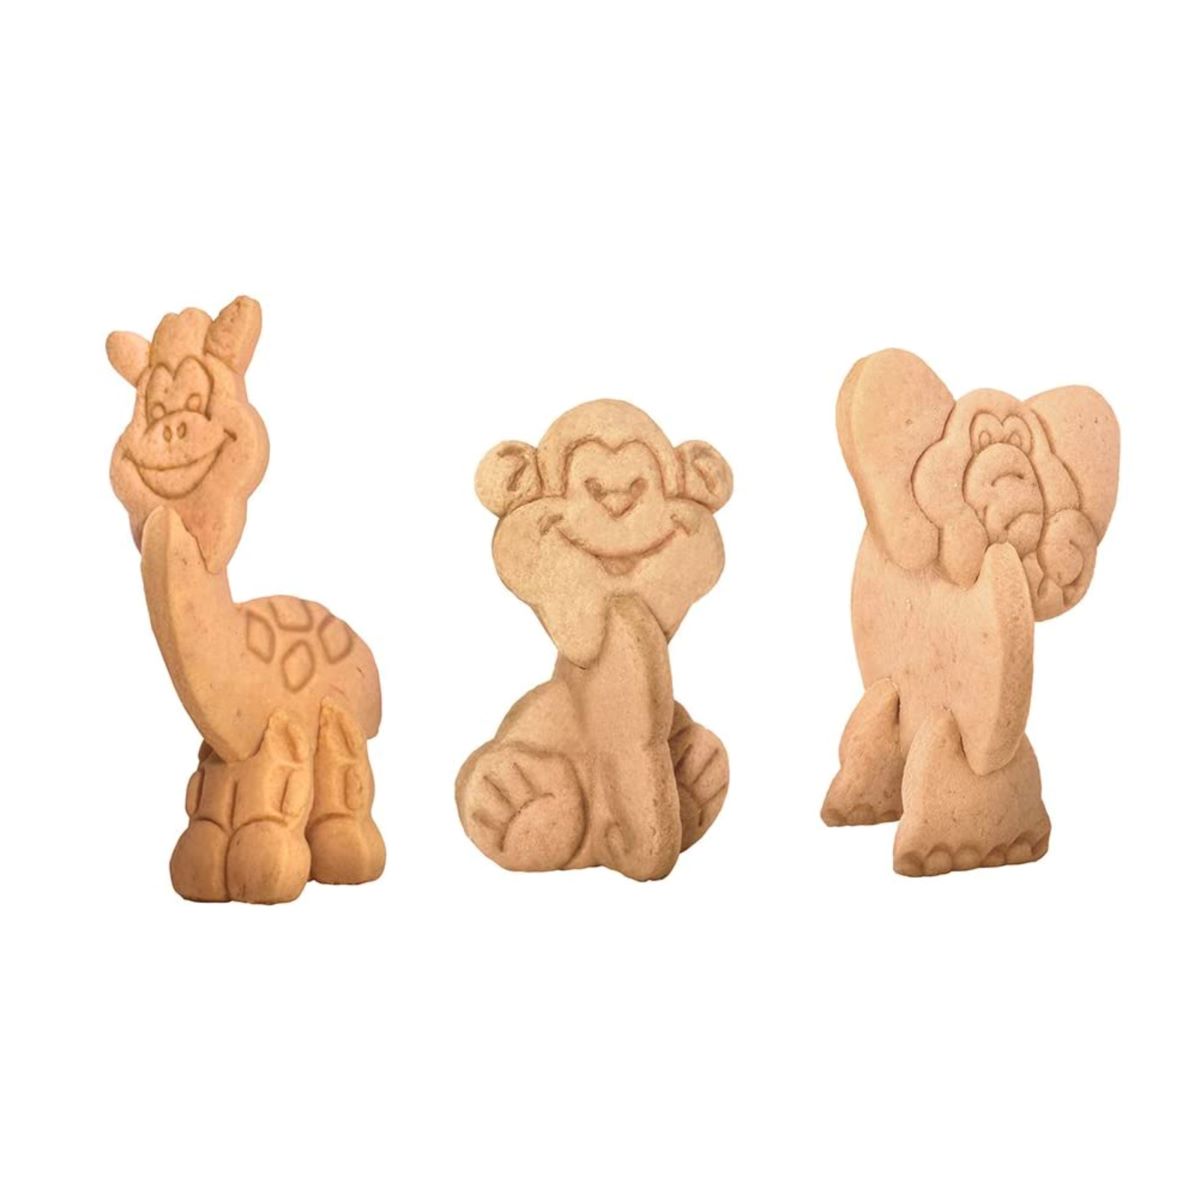 3pc Giant 3D Cookie Cutters – Make Animal Designs That Stand Up!